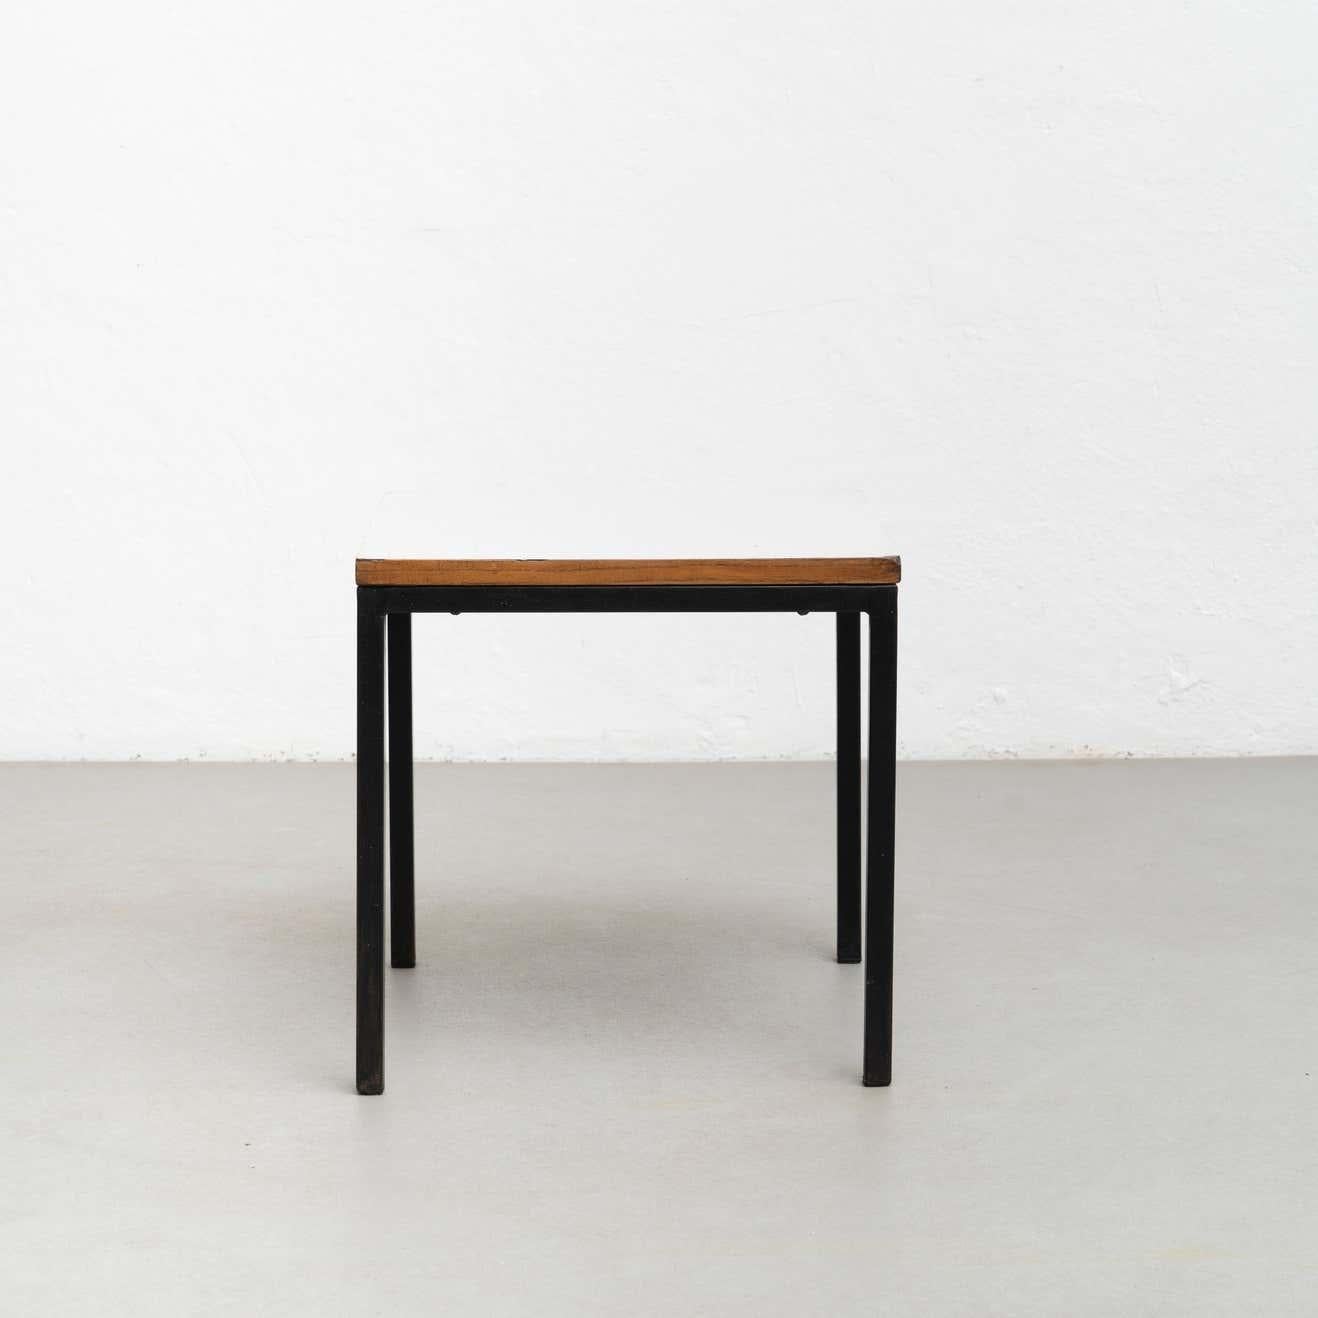 Mauritanian Charlotte Perriand Metal, Wood and Formica Table for Cansado, circa 1950 For Sale